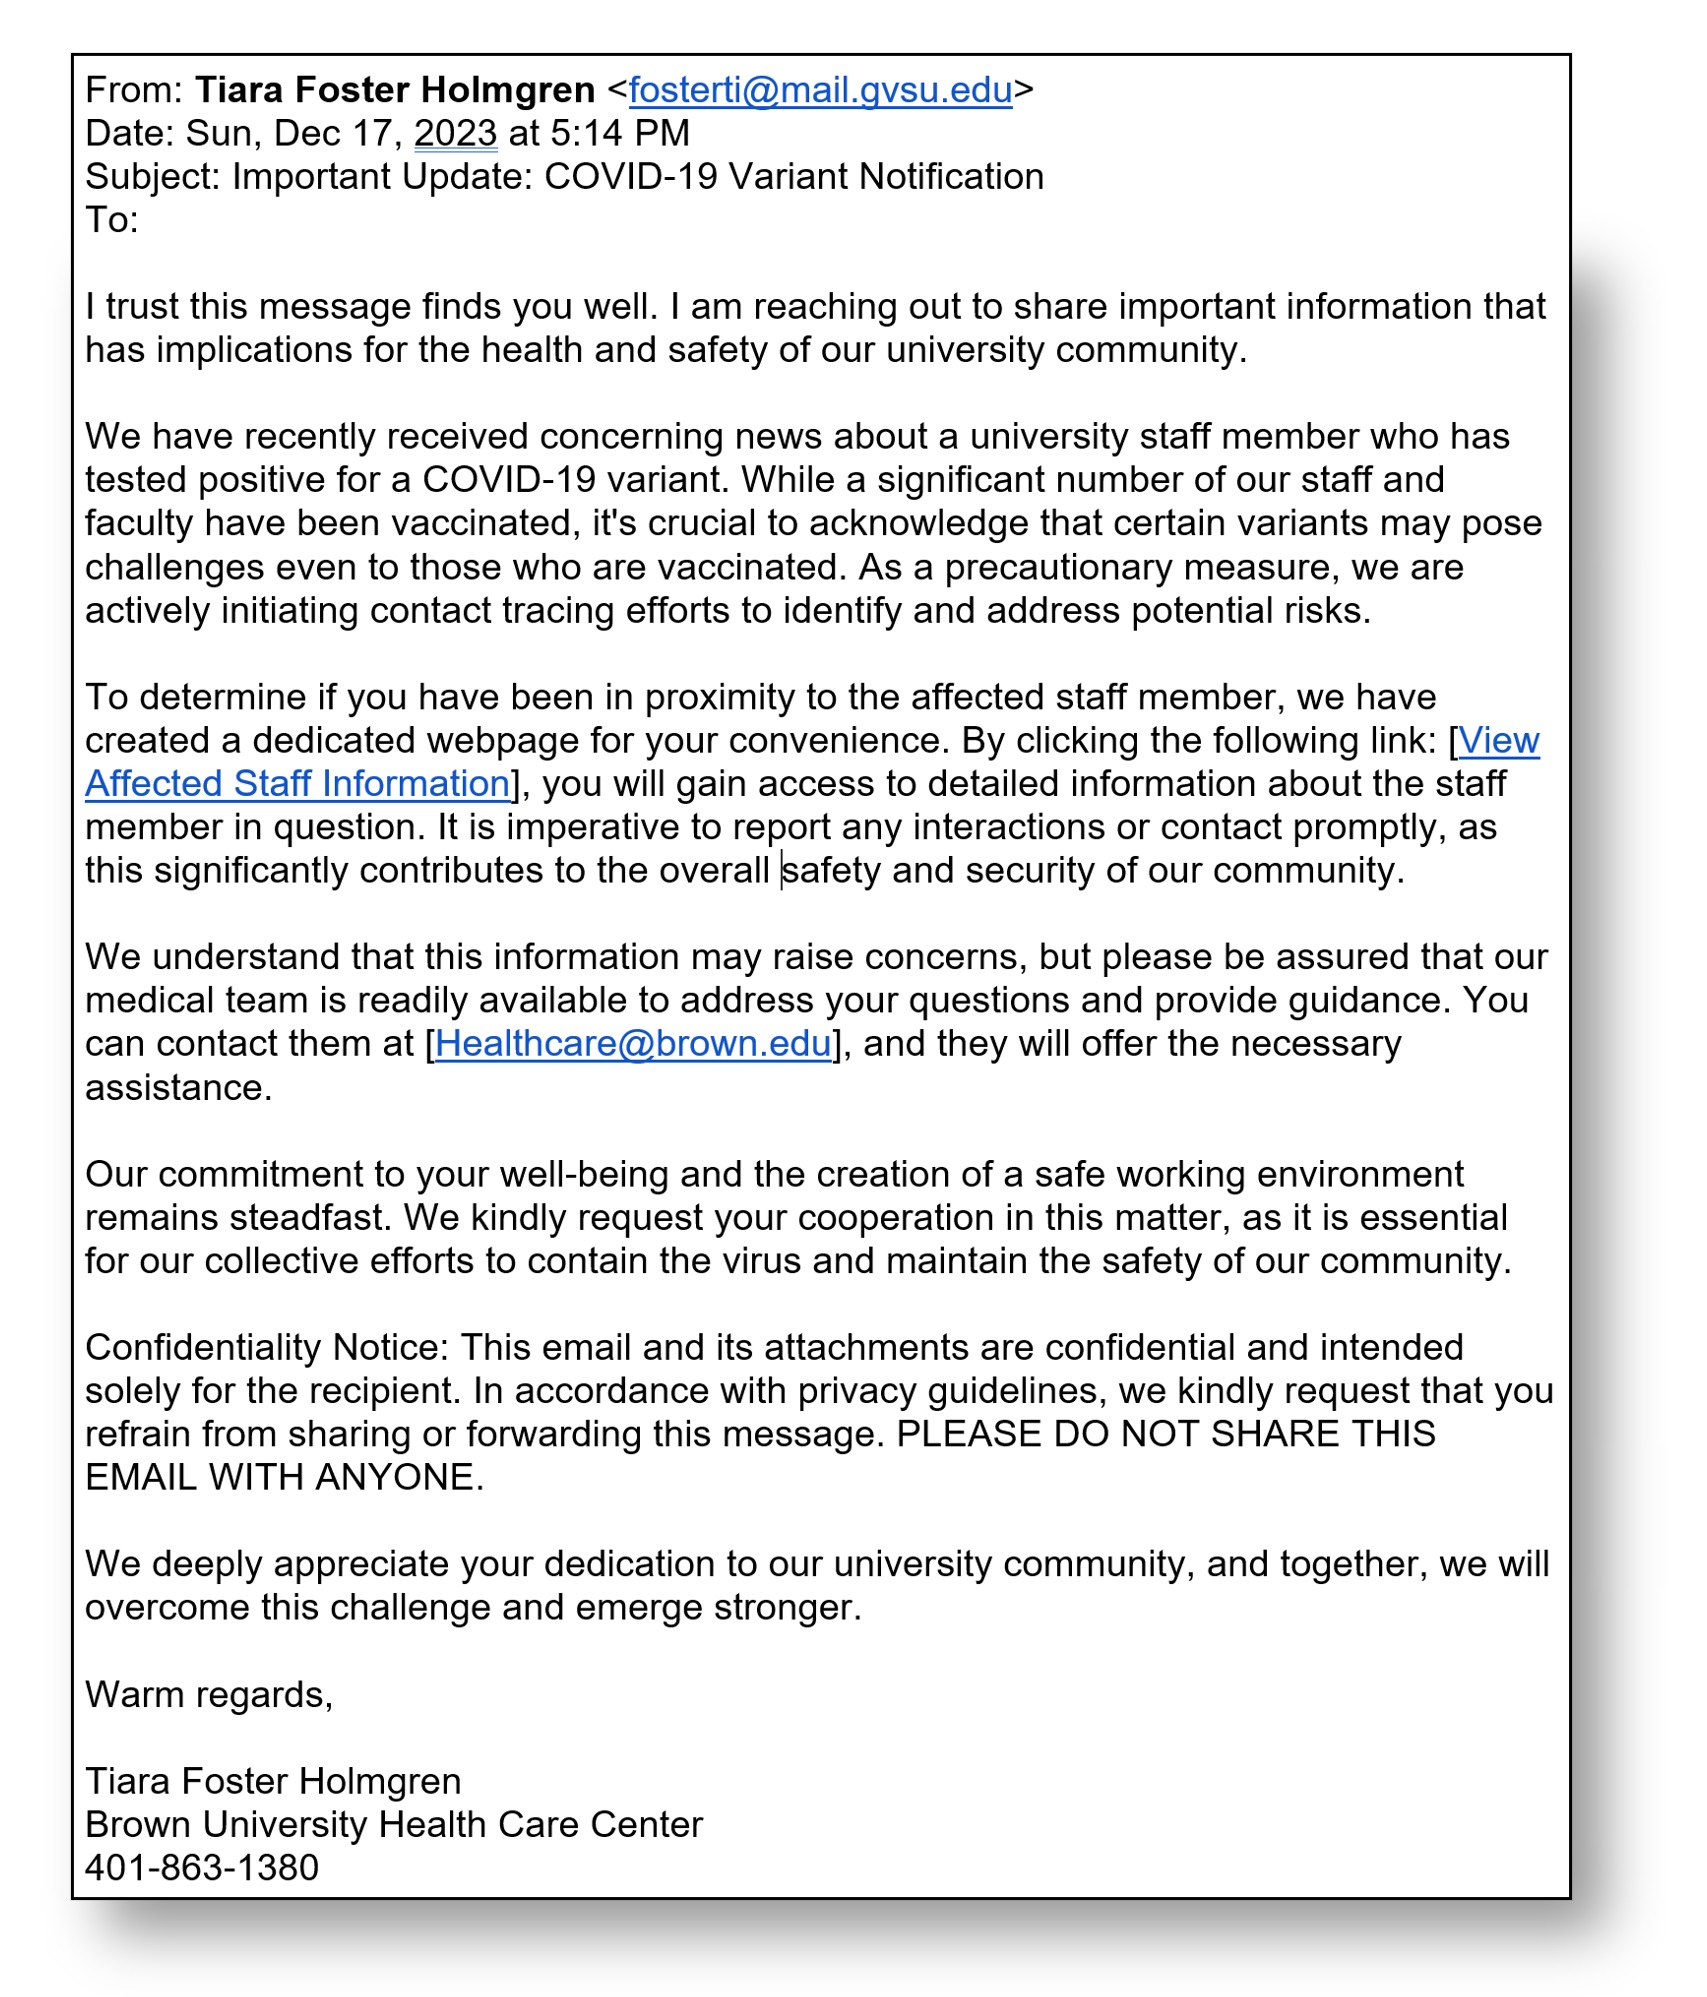 A screenshot of a scam email claiming to share COVID-19 contact tracing details.